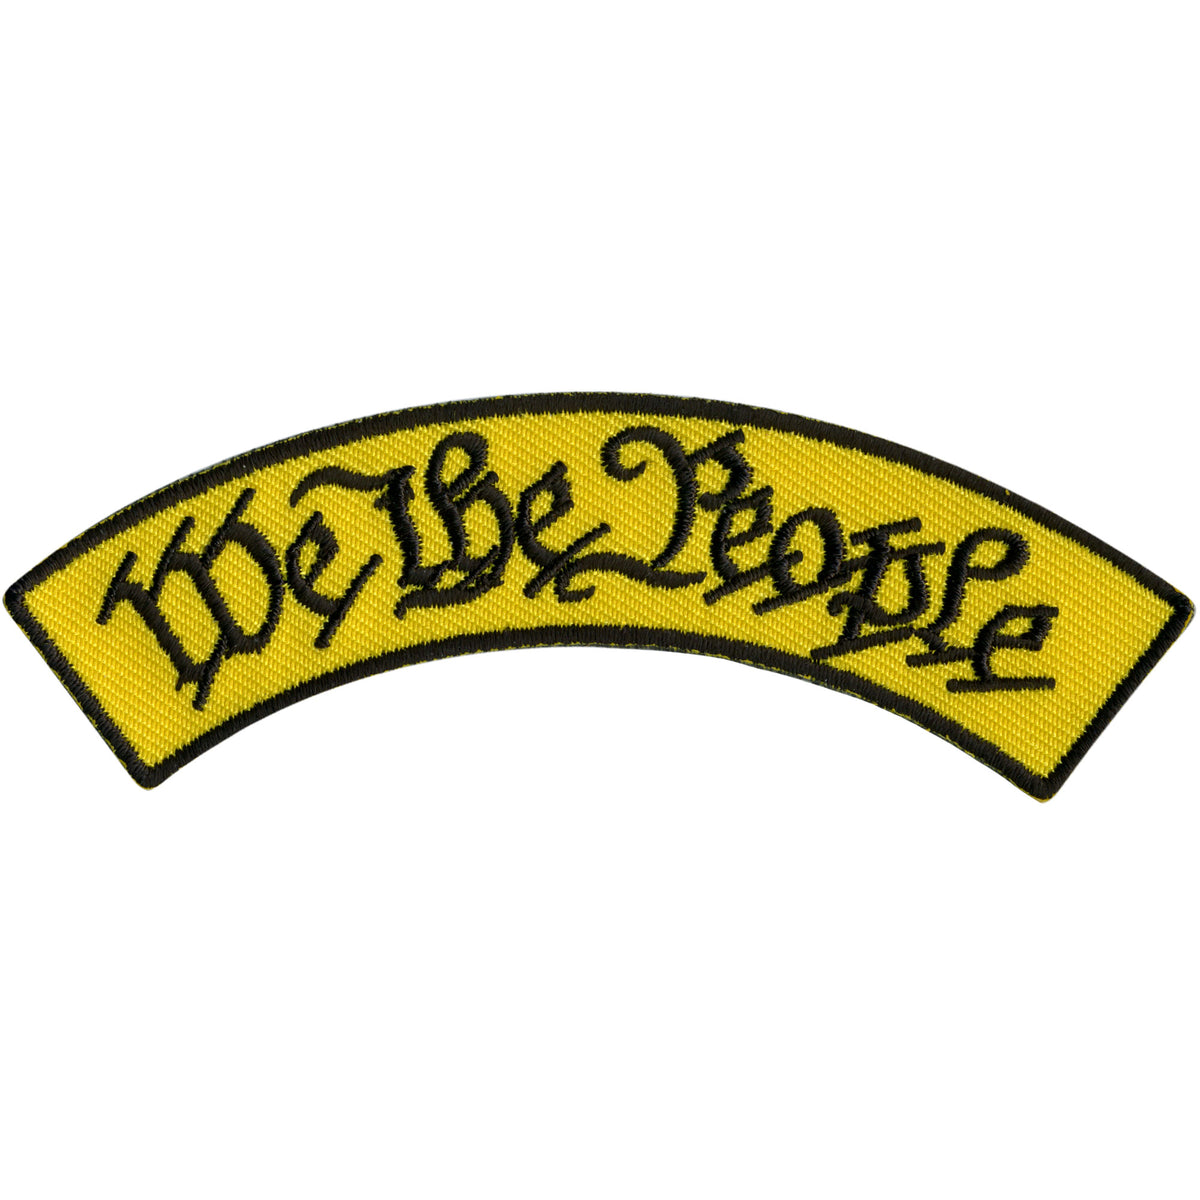 Hot Leathers We The People 4” X 1” Top Rocker Patch